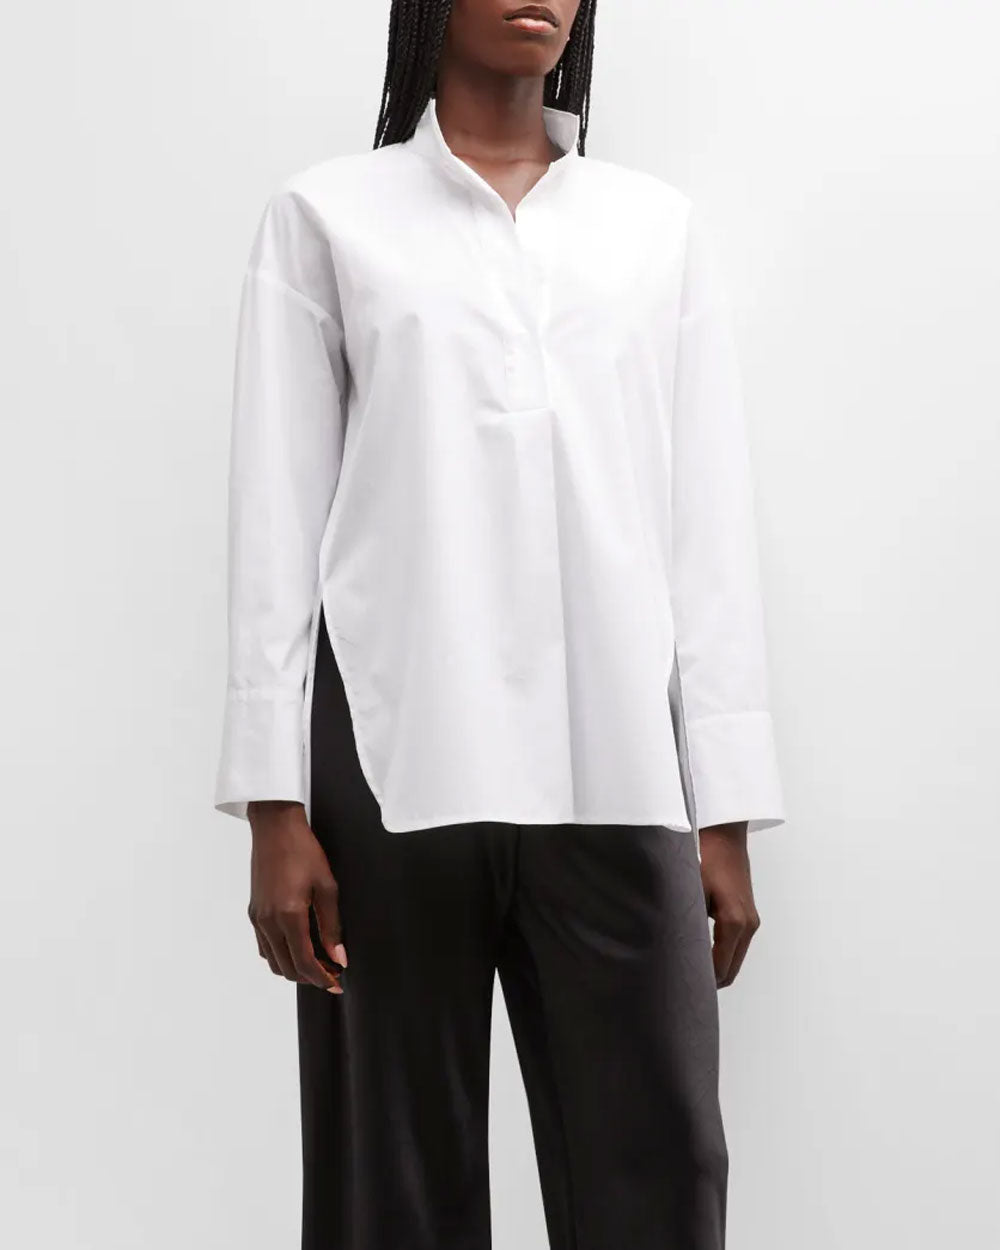 Off White Placket Stand Collar Shirt